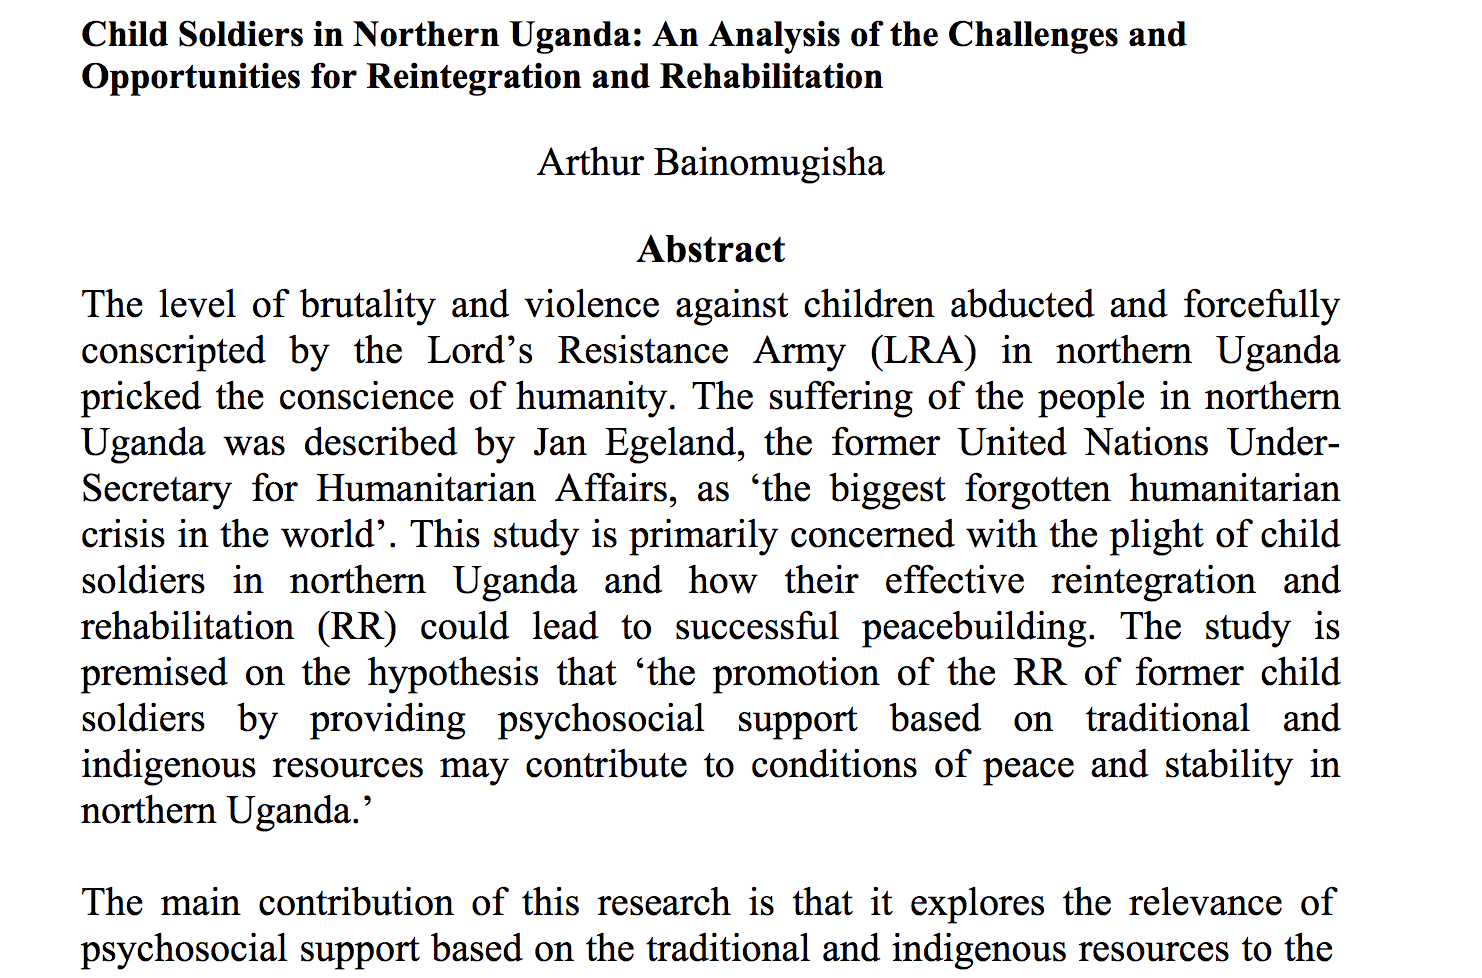 Child Soldiers in Northern Uganda: An Analysis of the Challenges and Opportunities for Reintegration and Rehabilitation